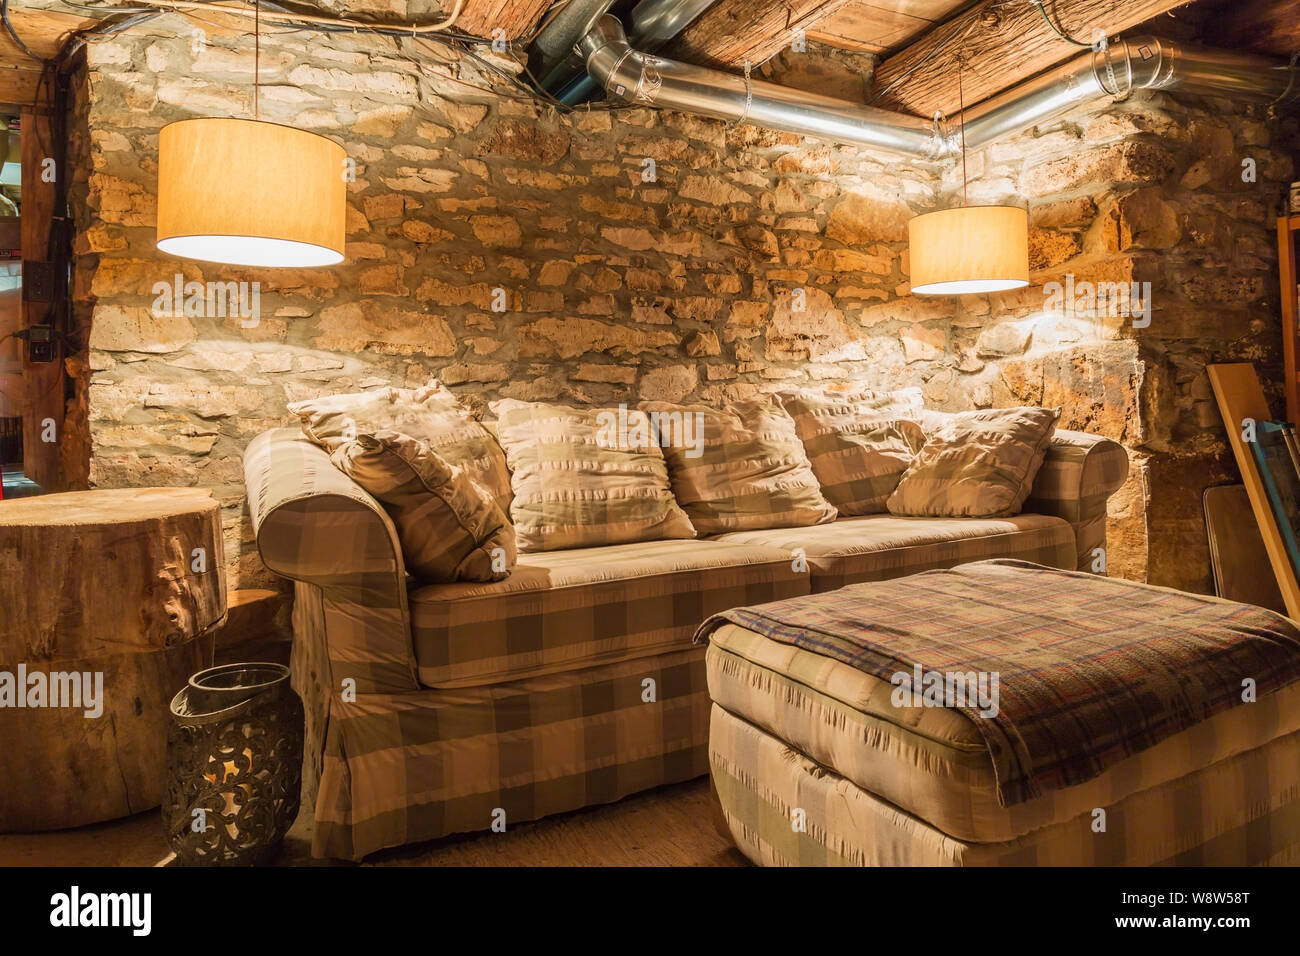 Tartan sofa-bed against original foundation fieldstone wall in basement room inside an old 1820 cottage style cut stone and fieldstone house Stock Photo